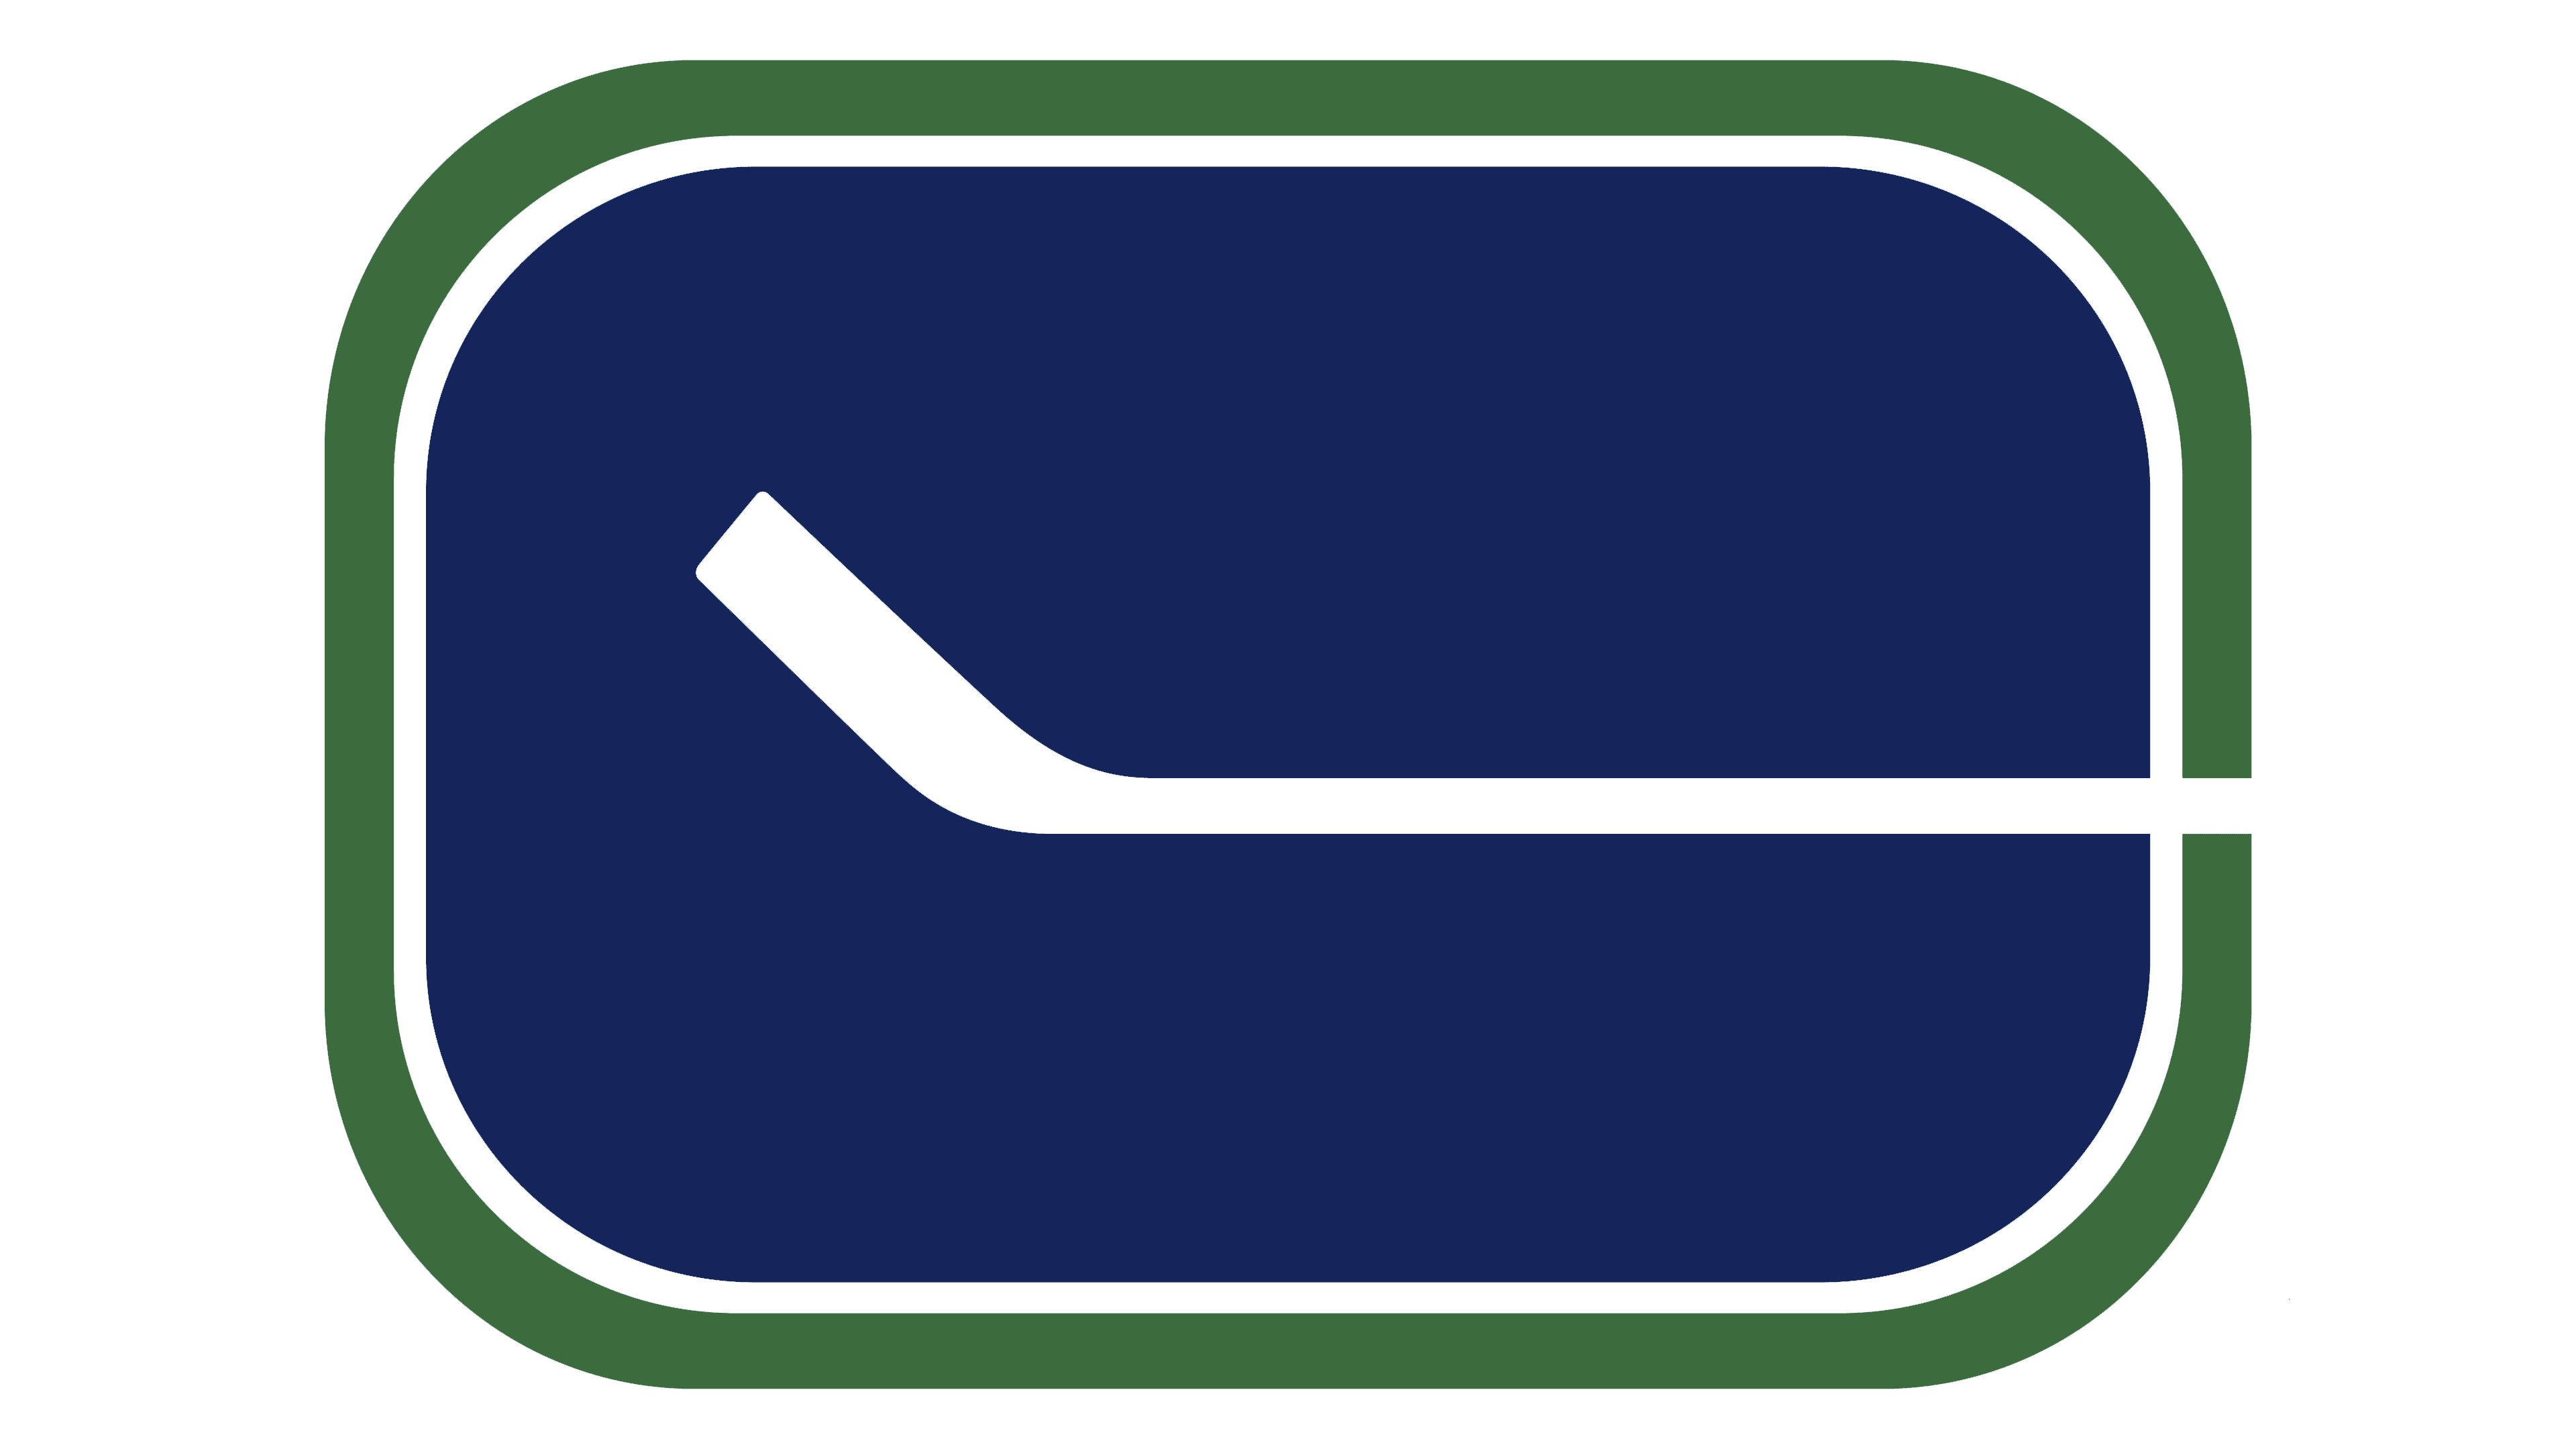 Vancouver Canucks Logo, symbol, meaning, history, PNG, brand